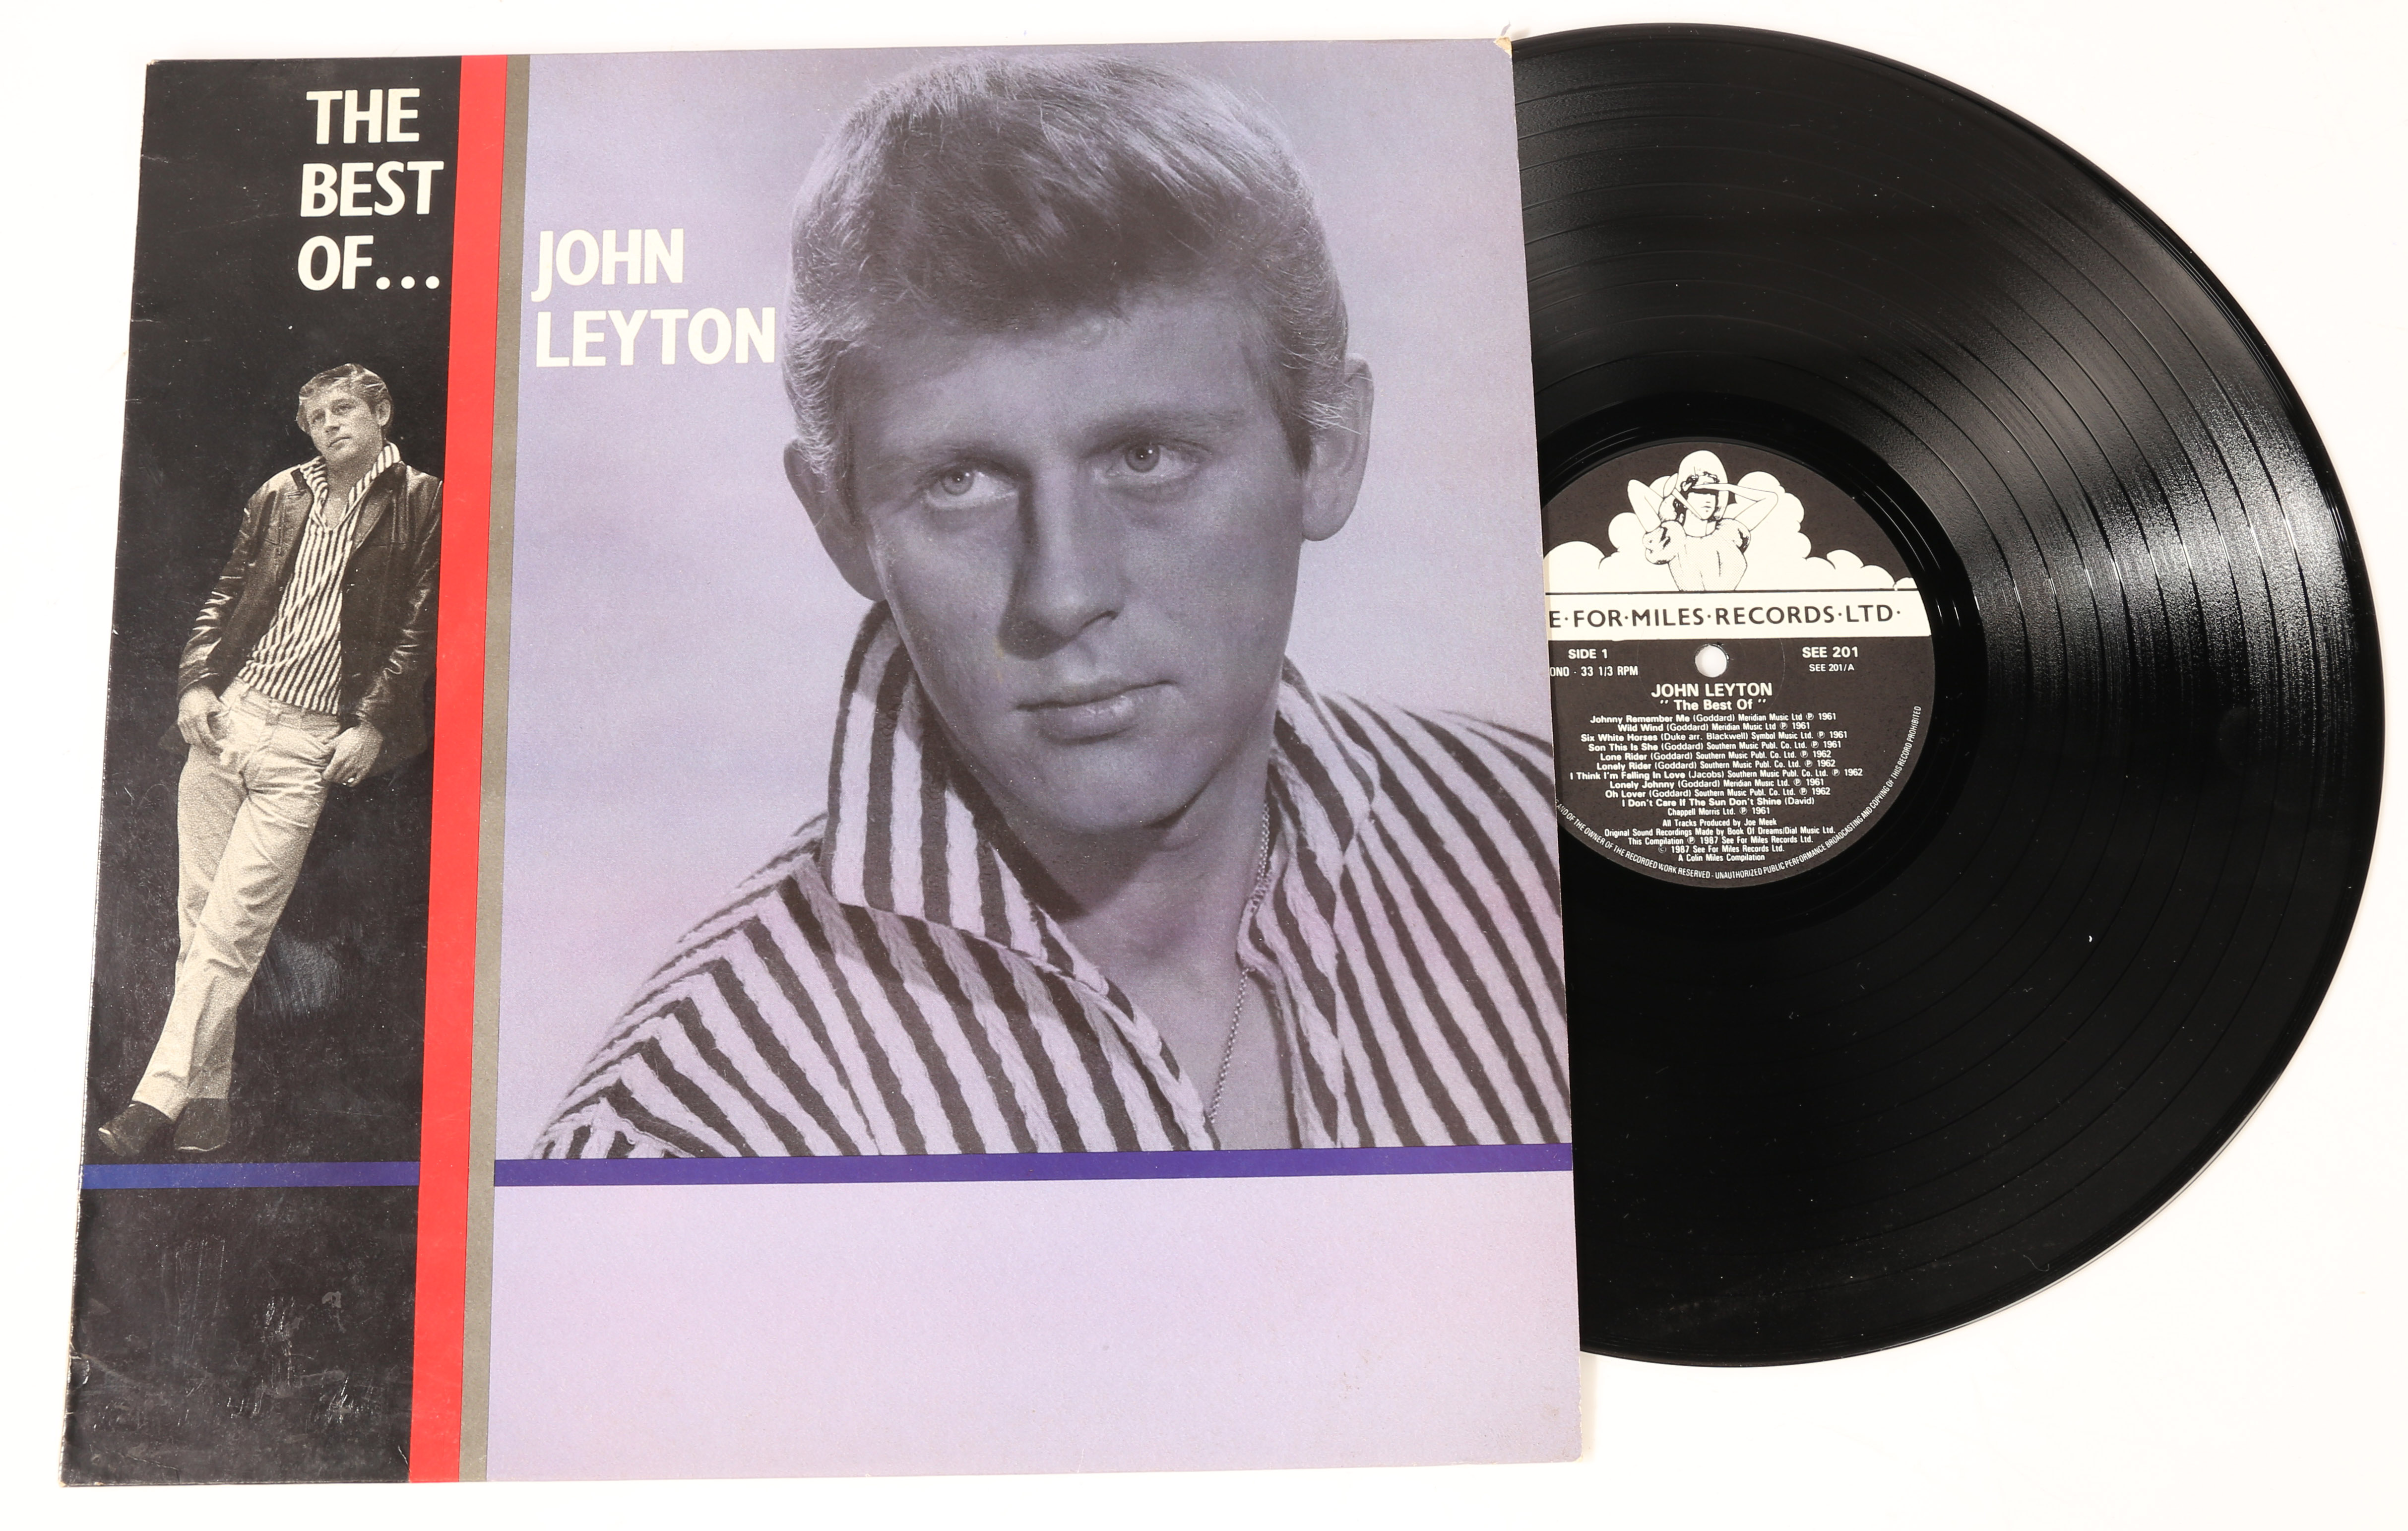 John Leyton. A collection of LPs, 45s, DVDs, and memorabilia relating to the music career of John - Image 2 of 32